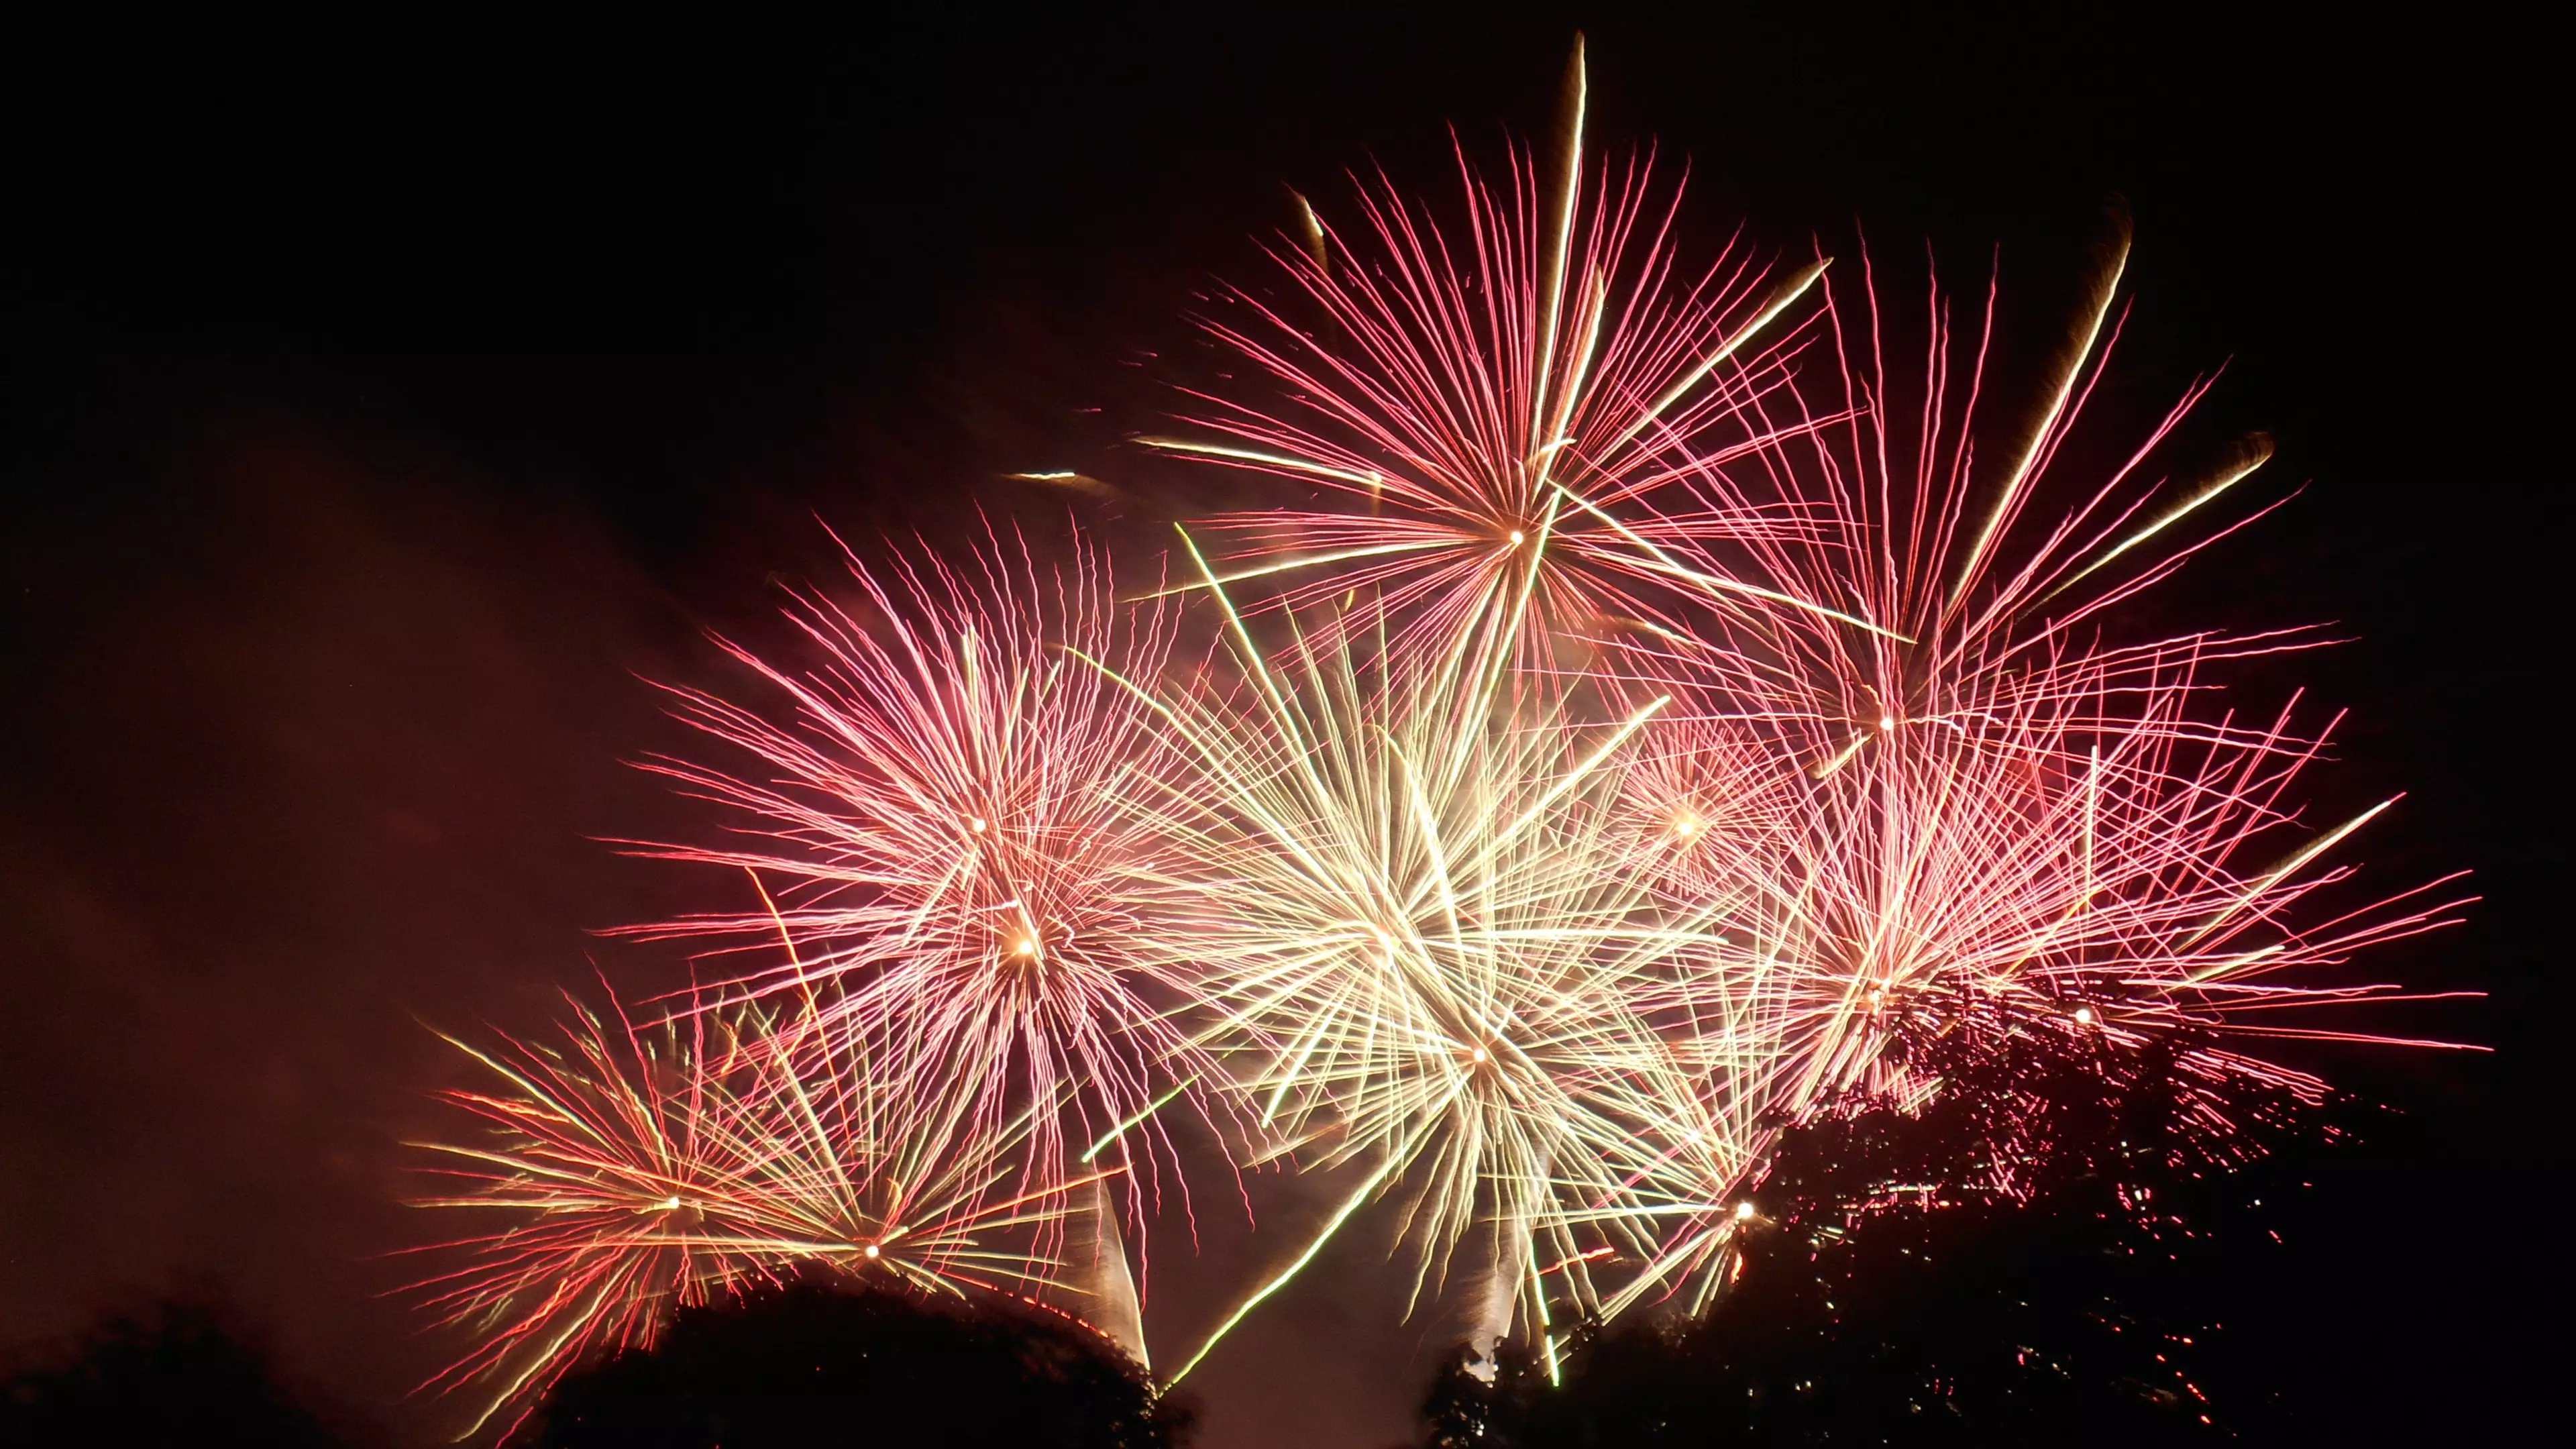 A petition has been launched calling for the ban of fireworks (